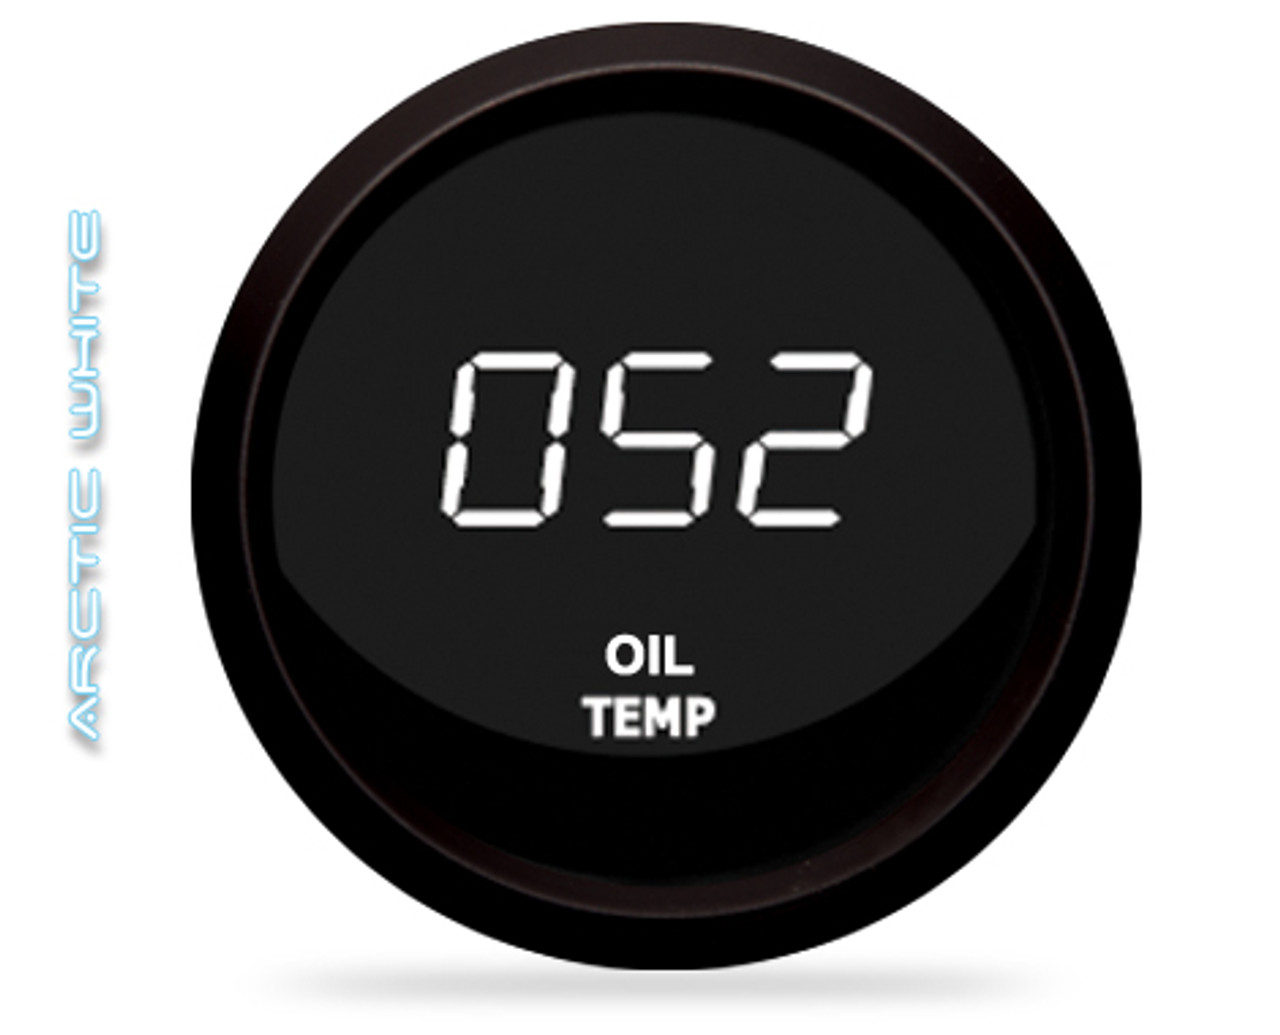 Oil Temperature LED Digital Black Bezel - M9108
The LED Digital Oil Temperature gauge is microprocessor-controlled and has a 50-250 degrees Fahrenheit range of accuracy! Intellitronix Oil Temperature gauge has precision accuracy, super bright LED lights, and electronic intelligence all in one.  
